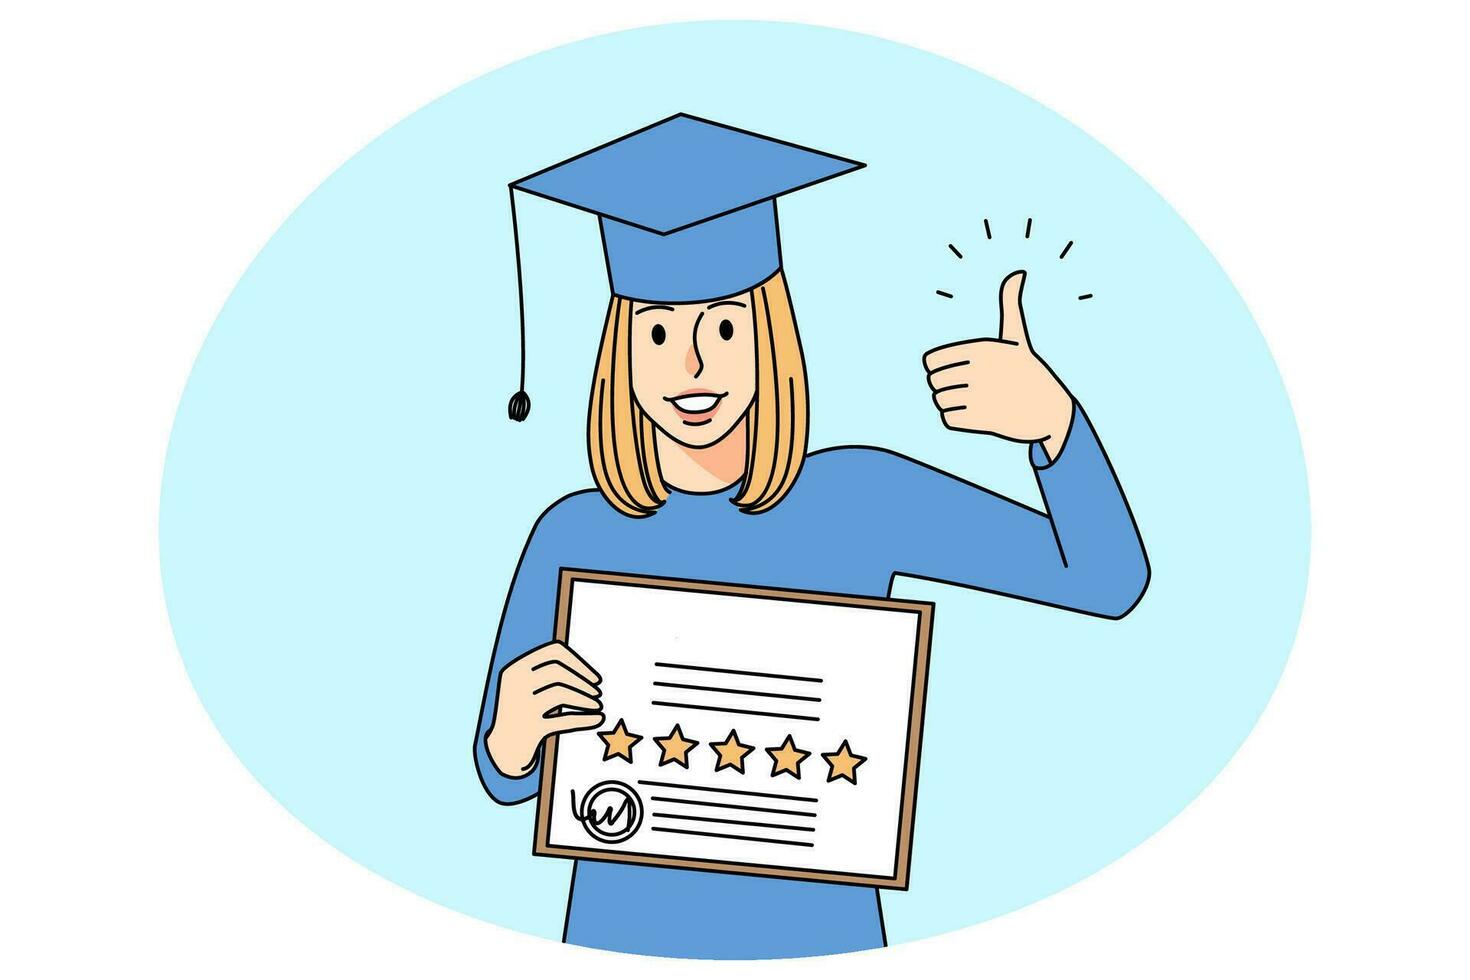 Smiling woman in mantle and hat show thumb up posing with university diploma. Happy girl in robe recommend business school or education course. Vector illustration.